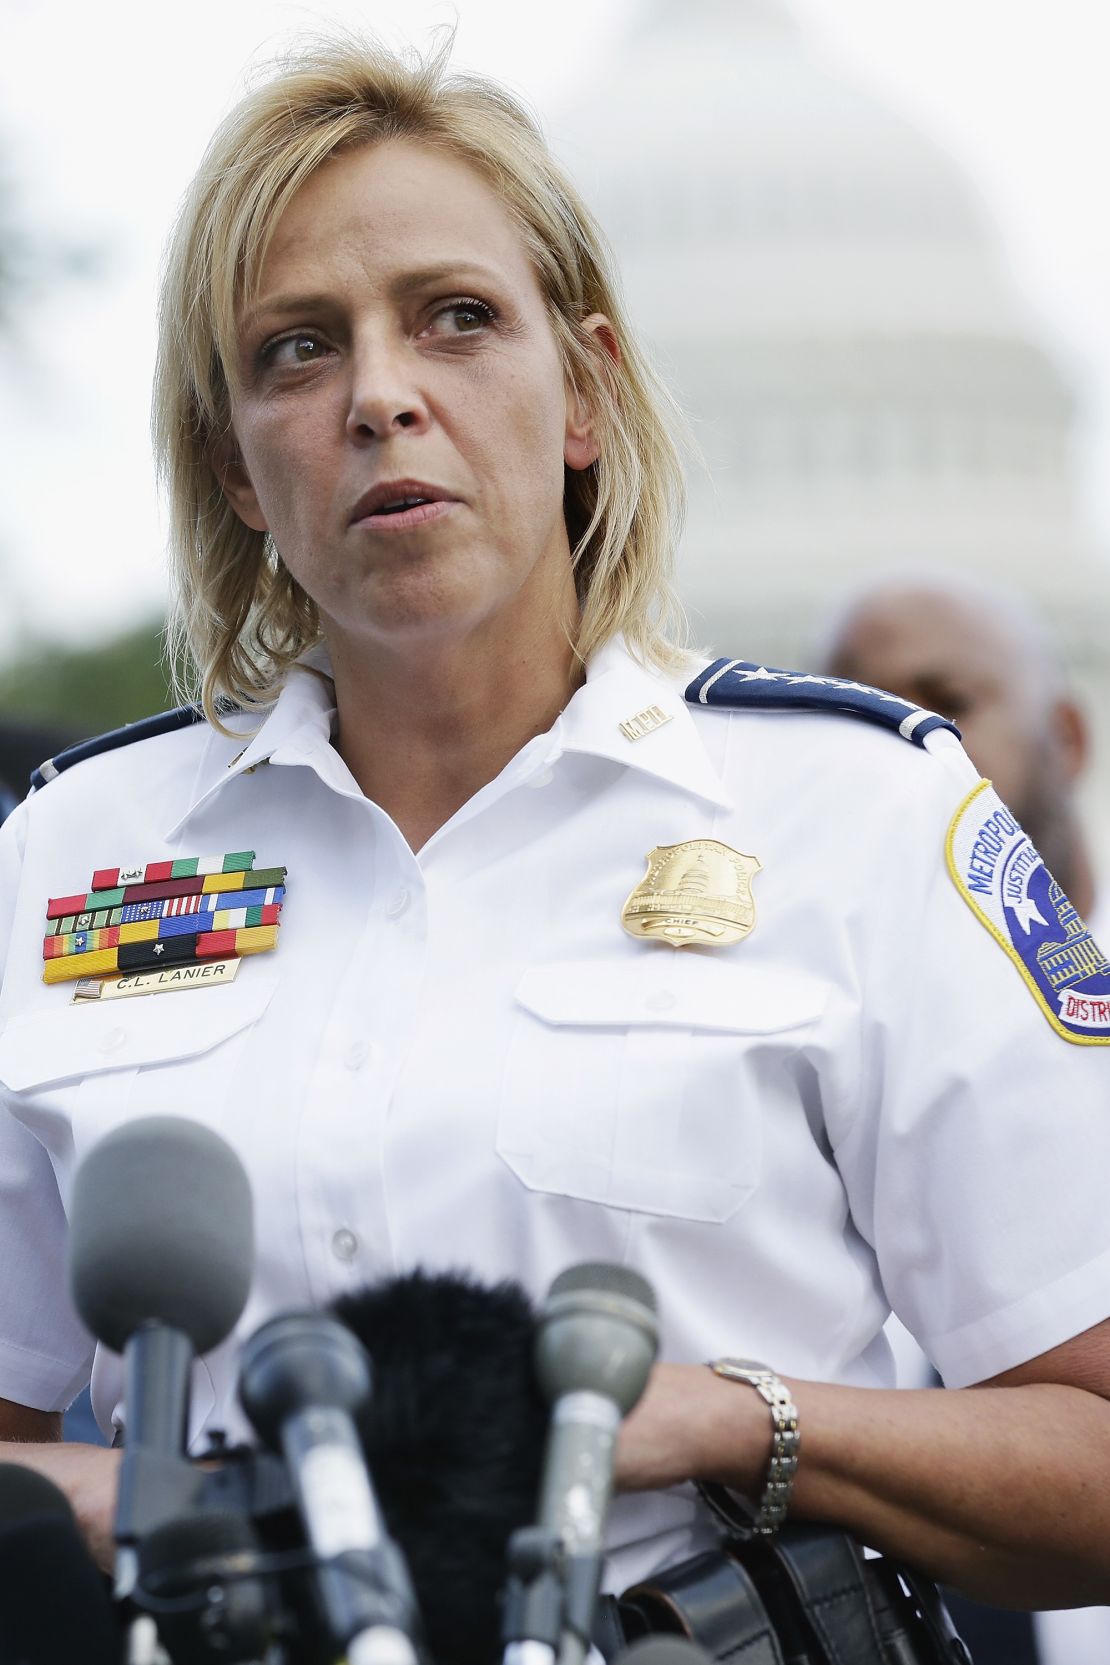 Washington DC Police Chief Cathy Lanier will become head of security for the NFL.